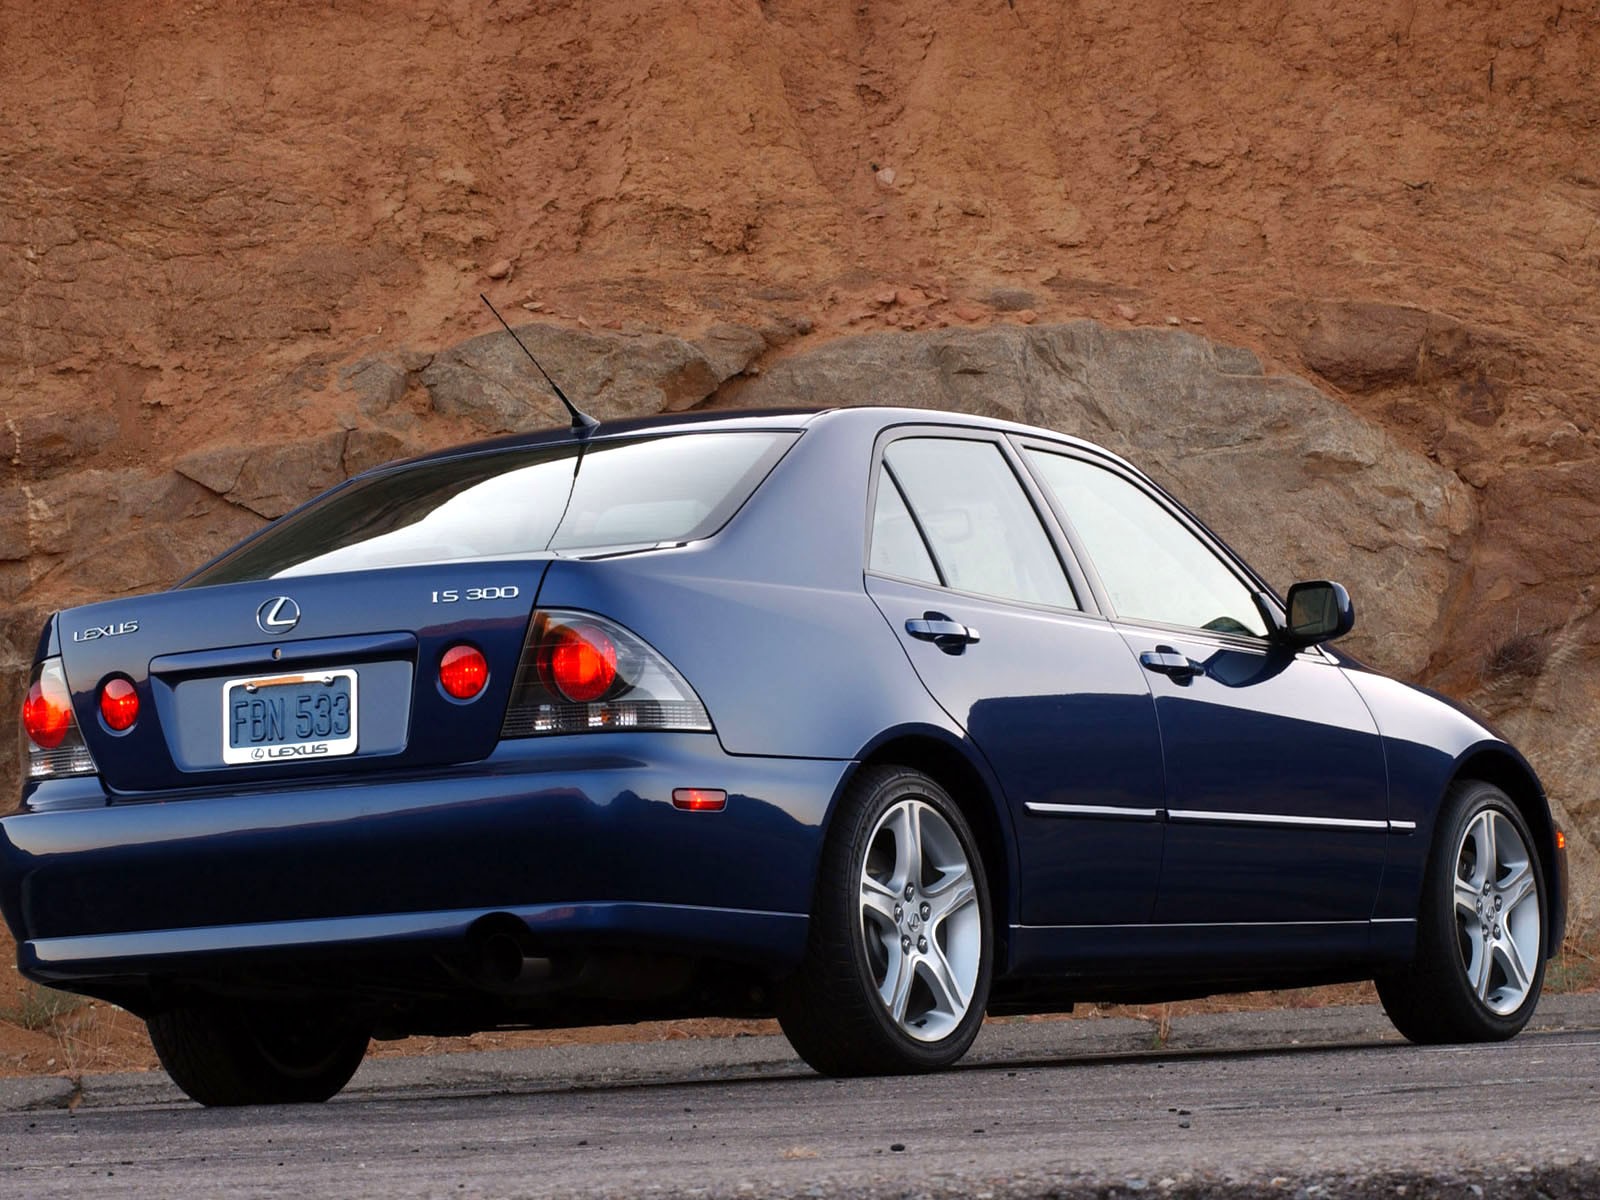 You can vote for this Lexus IS 300 photo